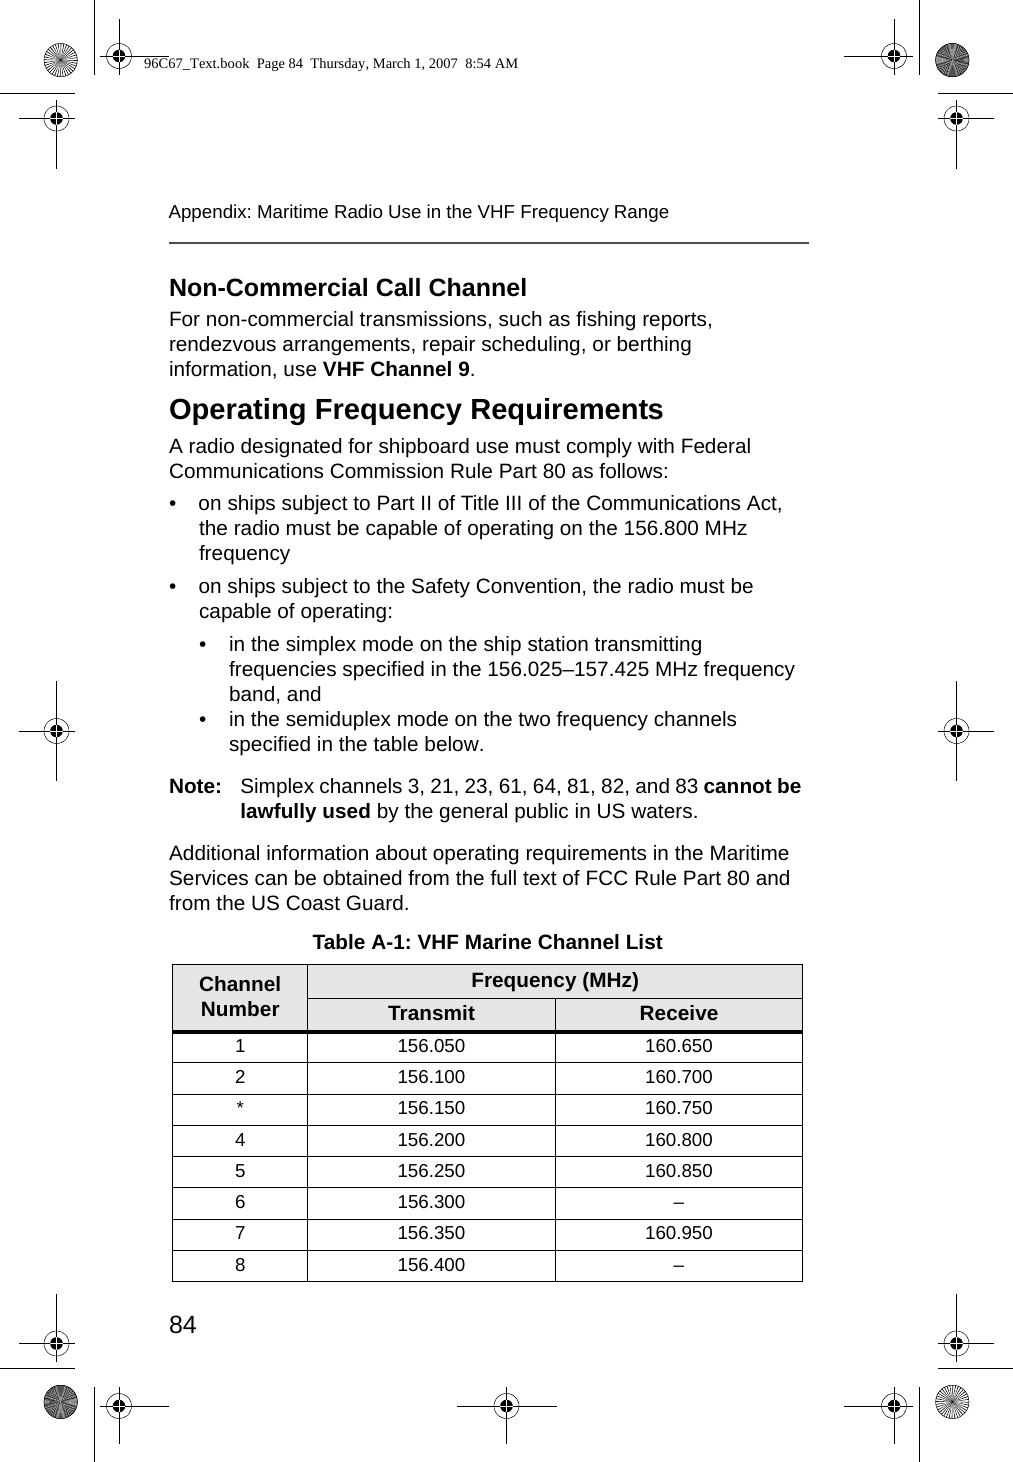 84Appendix: Maritime Radio Use in the VHF Frequency RangeNon-Commercial Call ChannelFor non-commercial transmissions, such as fishing reports, rendezvous arrangements, repair scheduling, or berthing information, use VHF Channel 9. Operating Frequency RequirementsA radio designated for shipboard use must comply with Federal Communications Commission Rule Part 80 as follows:• on ships subject to Part II of Title III of the Communications Act, the radio must be capable of operating on the 156.800 MHz frequency• on ships subject to the Safety Convention, the radio must be capable of operating:• in the simplex mode on the ship station transmitting frequencies specified in the 156.025–157.425 MHz frequency band, and• in the semiduplex mode on the two frequency channels specified in the table below.Note: Simplex channels 3, 21, 23, 61, 64, 81, 82, and 83 cannot be lawfully used by the general public in US waters.Additional information about operating requirements in the Maritime Services can be obtained from the full text of FCC Rule Part 80 and from the US Coast Guard.Table A-1: VHF Marine Channel ListChannel NumberFrequency (MHz)Transmit Receive1 156.050 160.6502 156.100 160.700* 156.150 160.7504 156.200 160.8005 156.250 160.8506 156.300 –7 156.350 160.9508 156.400 –96C67_Text.book  Page 84  Thursday, March 1, 2007  8:54 AM